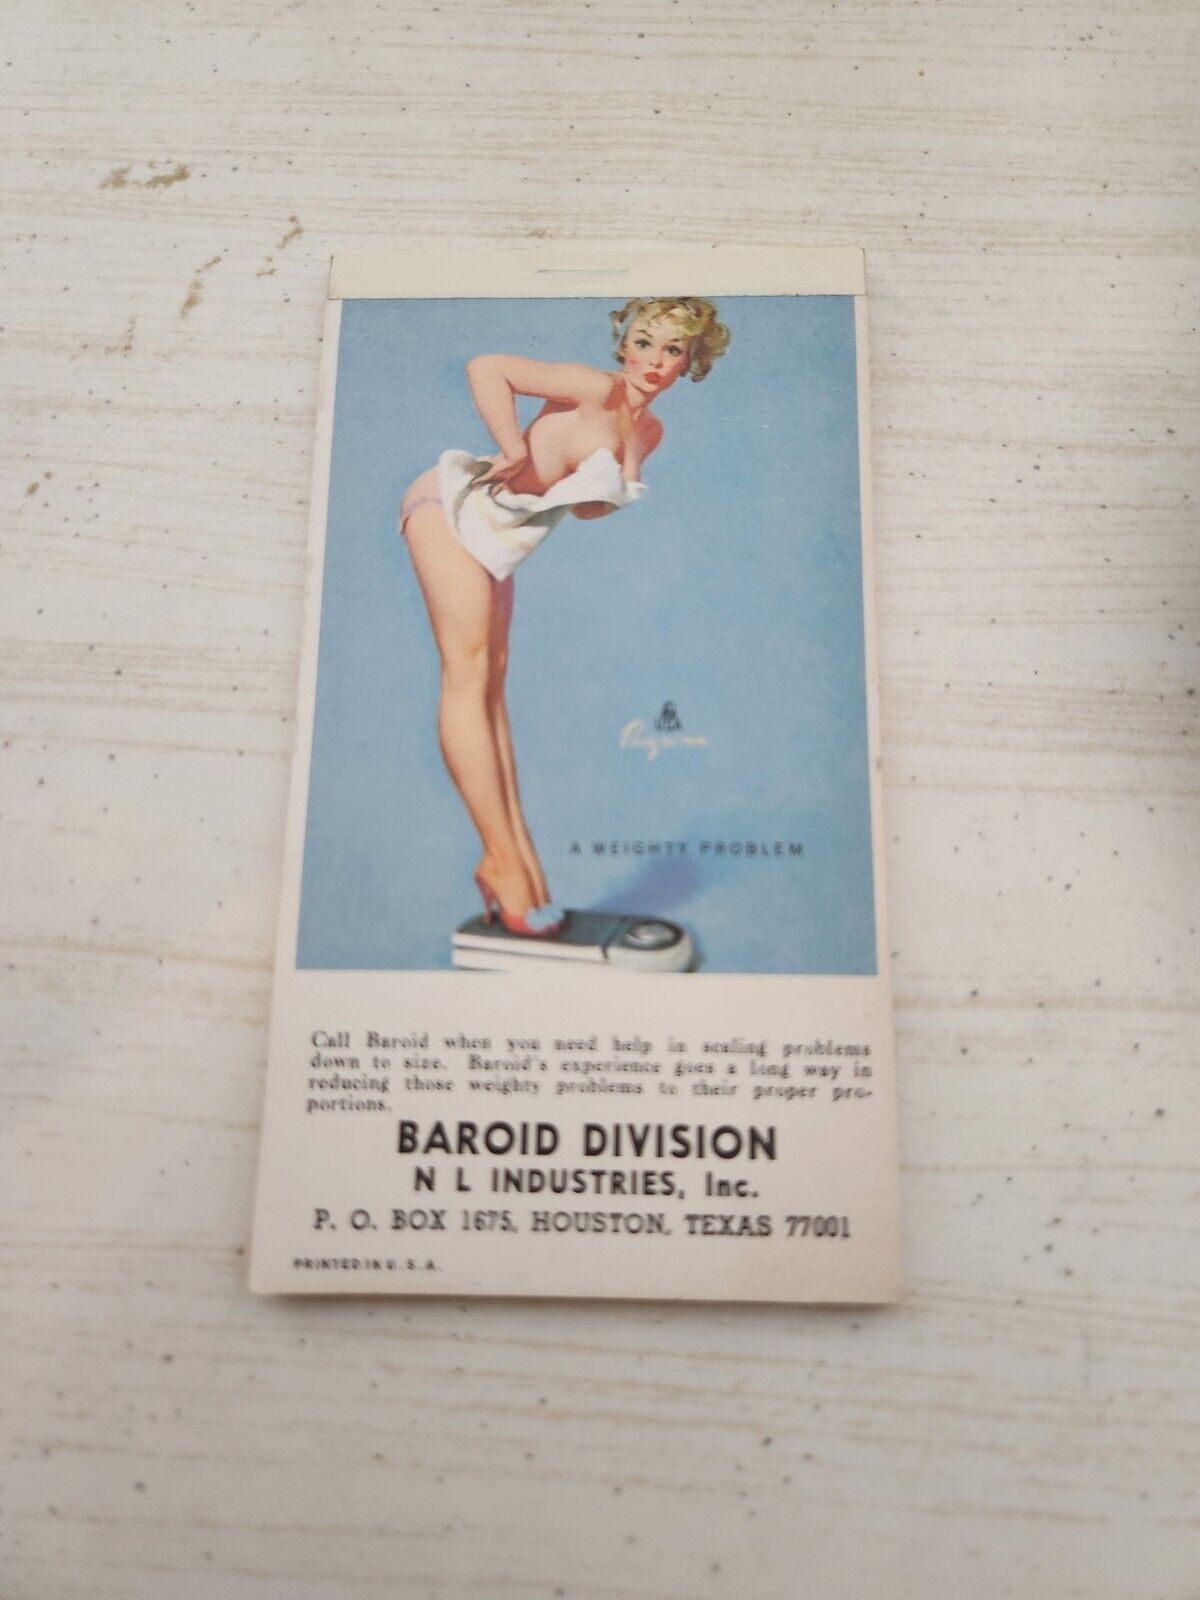 1971 Pinup Girl Notepad And Calendar Baroid Divison N L Industries, Inc.